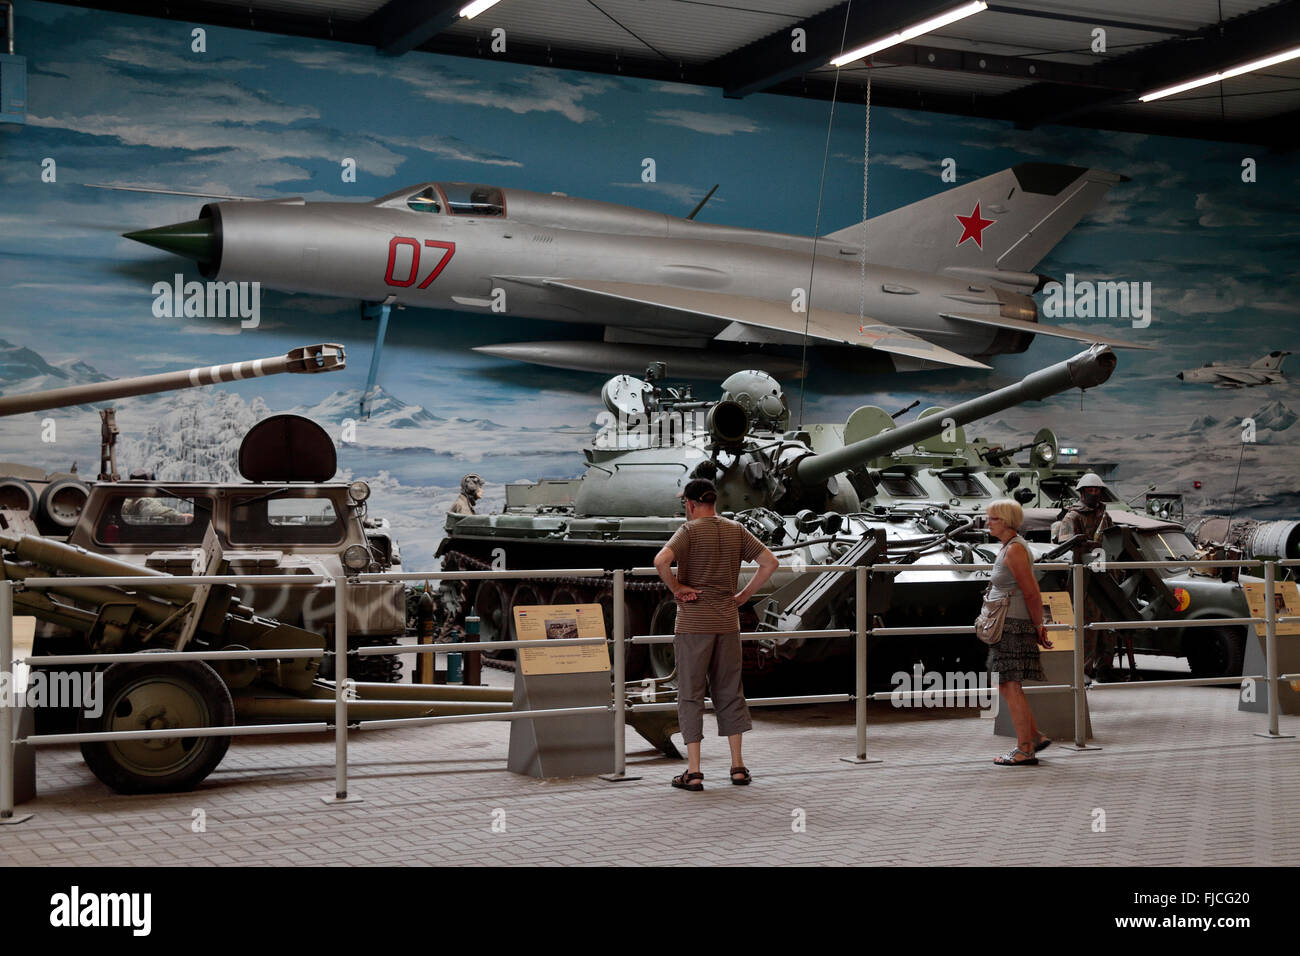 A Soviet Cold War Mig 21 fighter aircraft and other Cold War military vehicles in the Overloon War Museum, Netherlands. Stock Photo